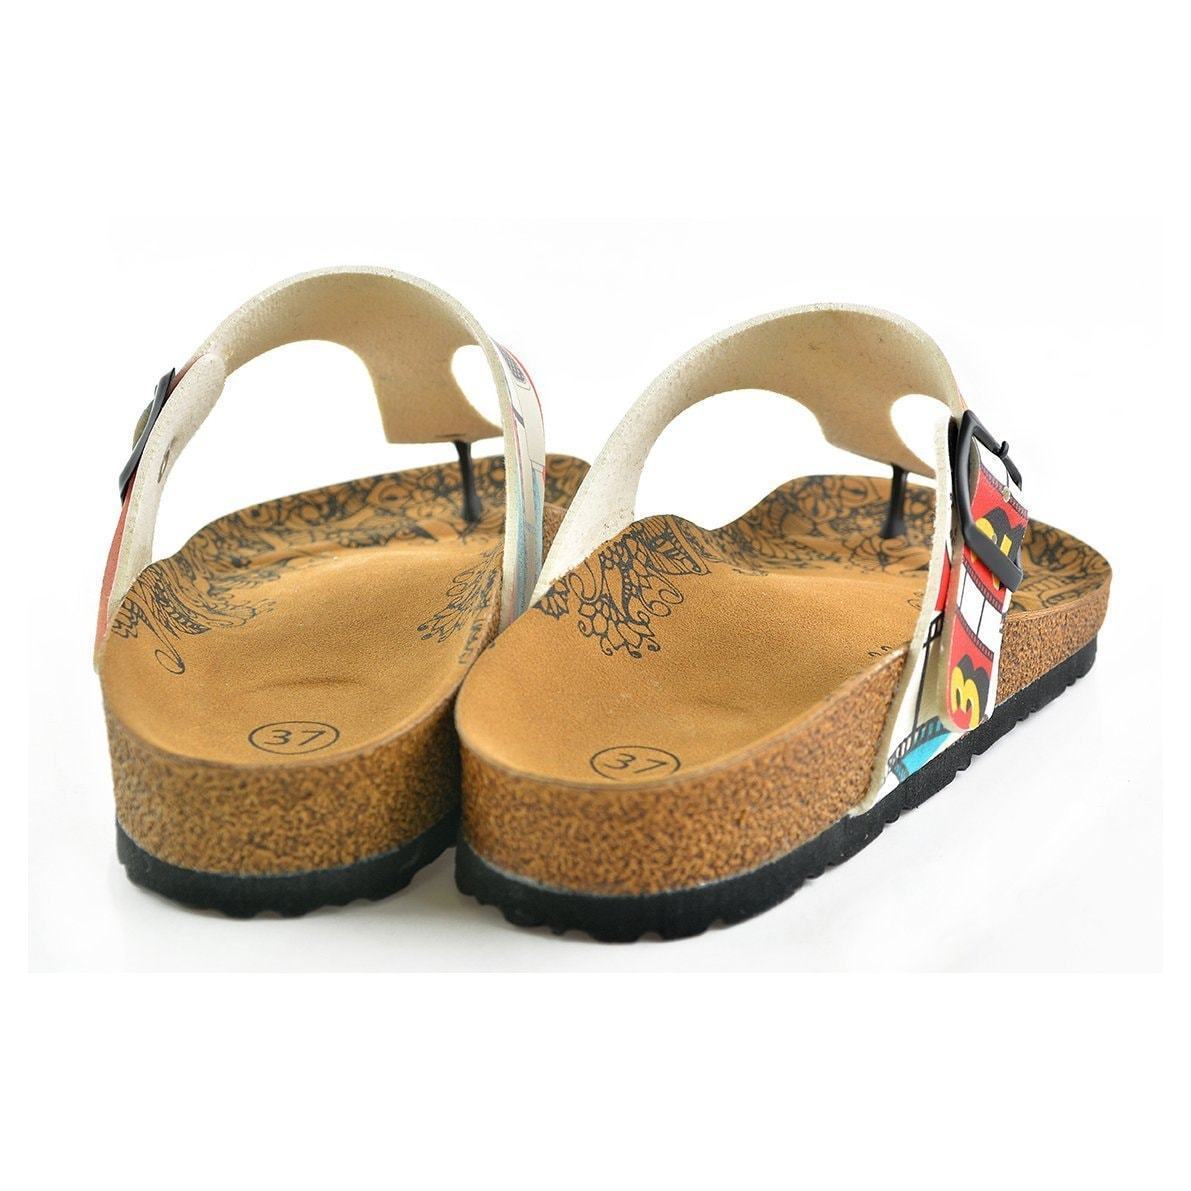 Camera Sandal CAL509, Goby, CALCEO Sandal 